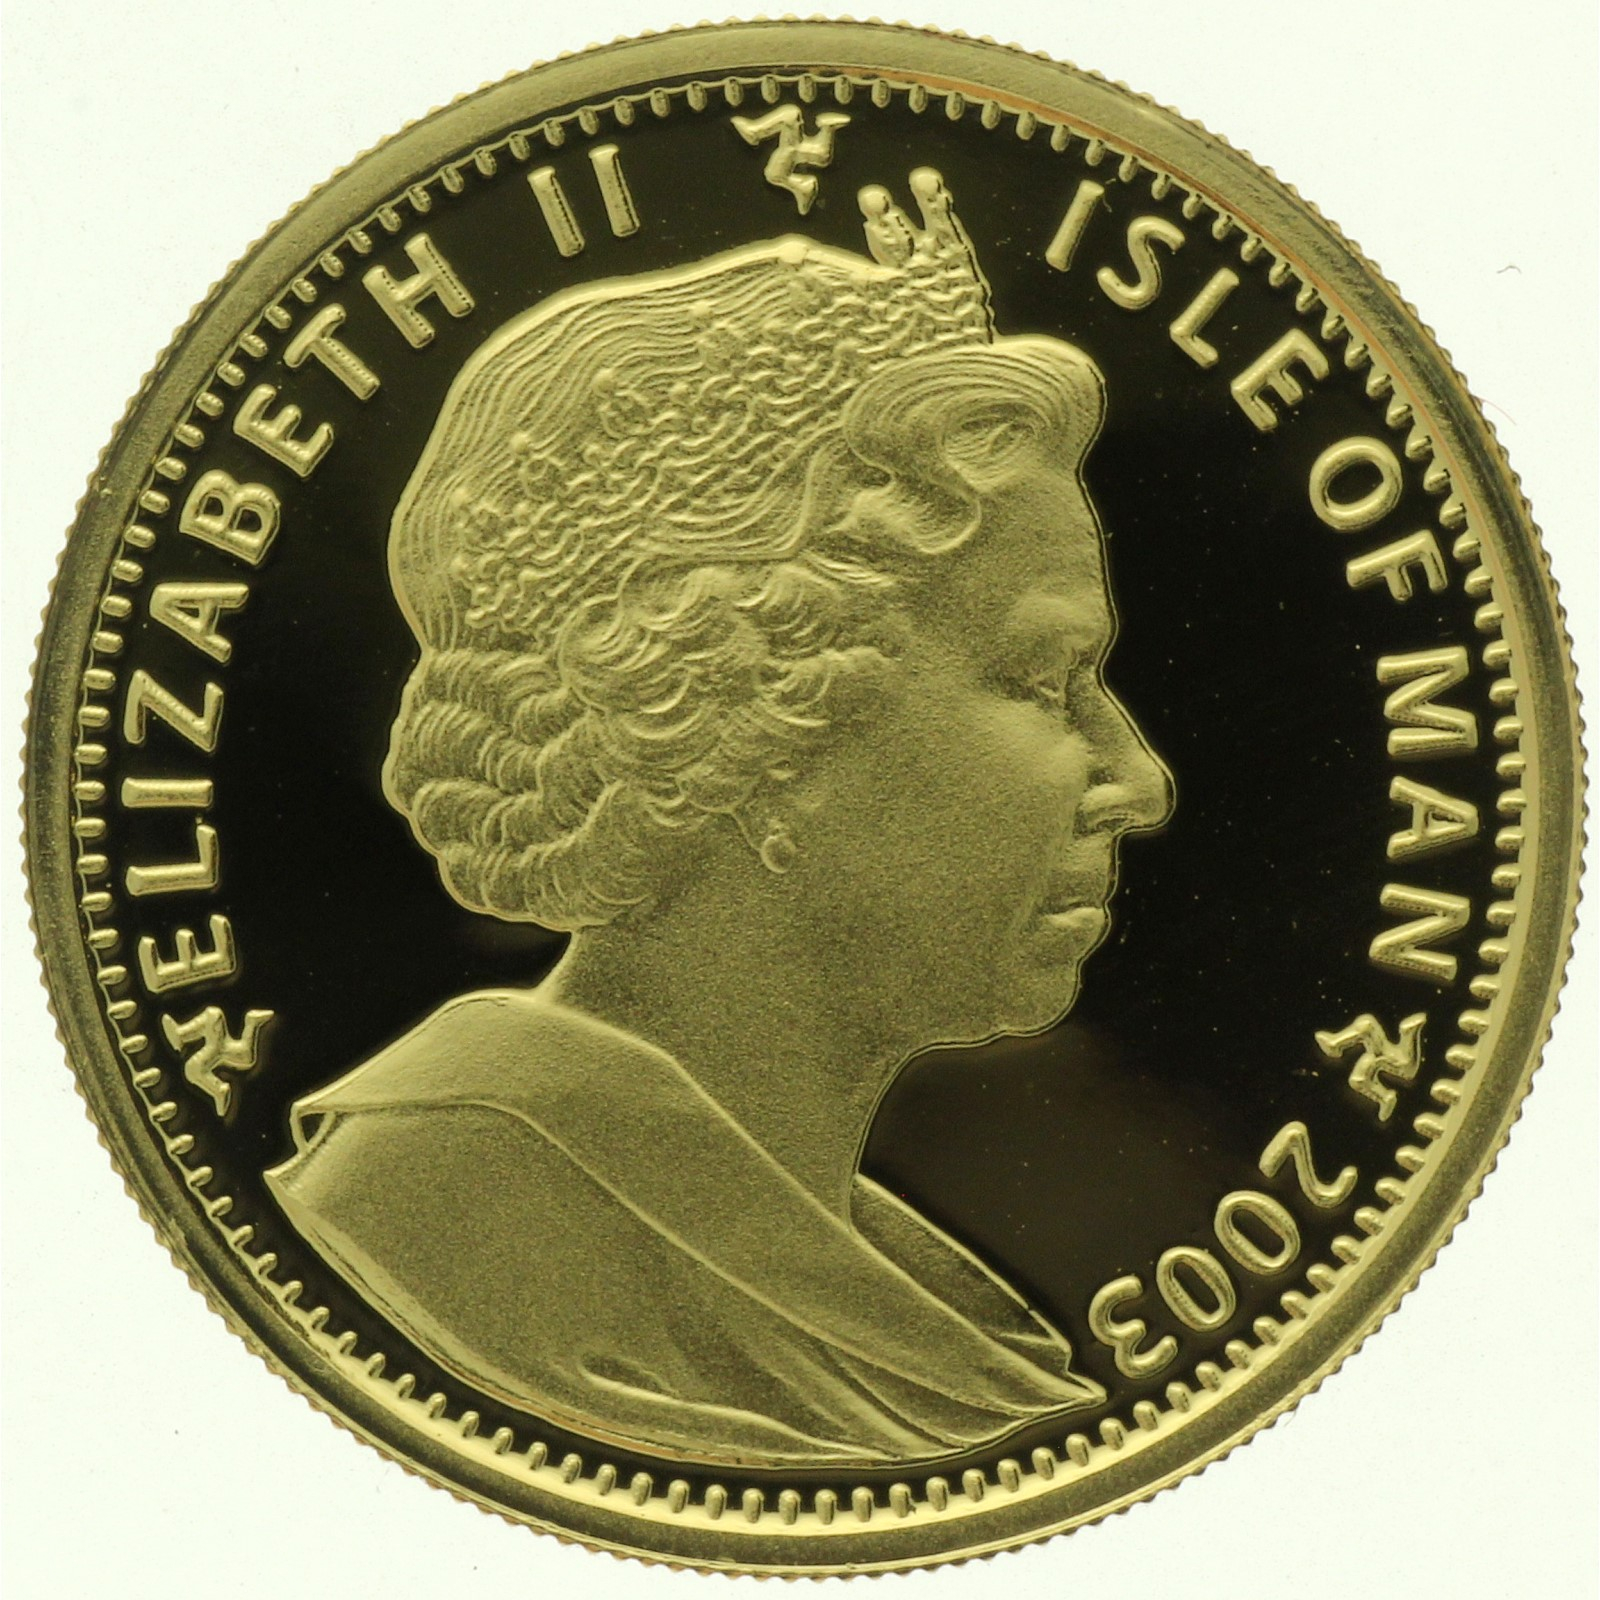 Isle of Man - 1/5 Crown - 2003 - Golden Age of Sir Walter Raleigh 